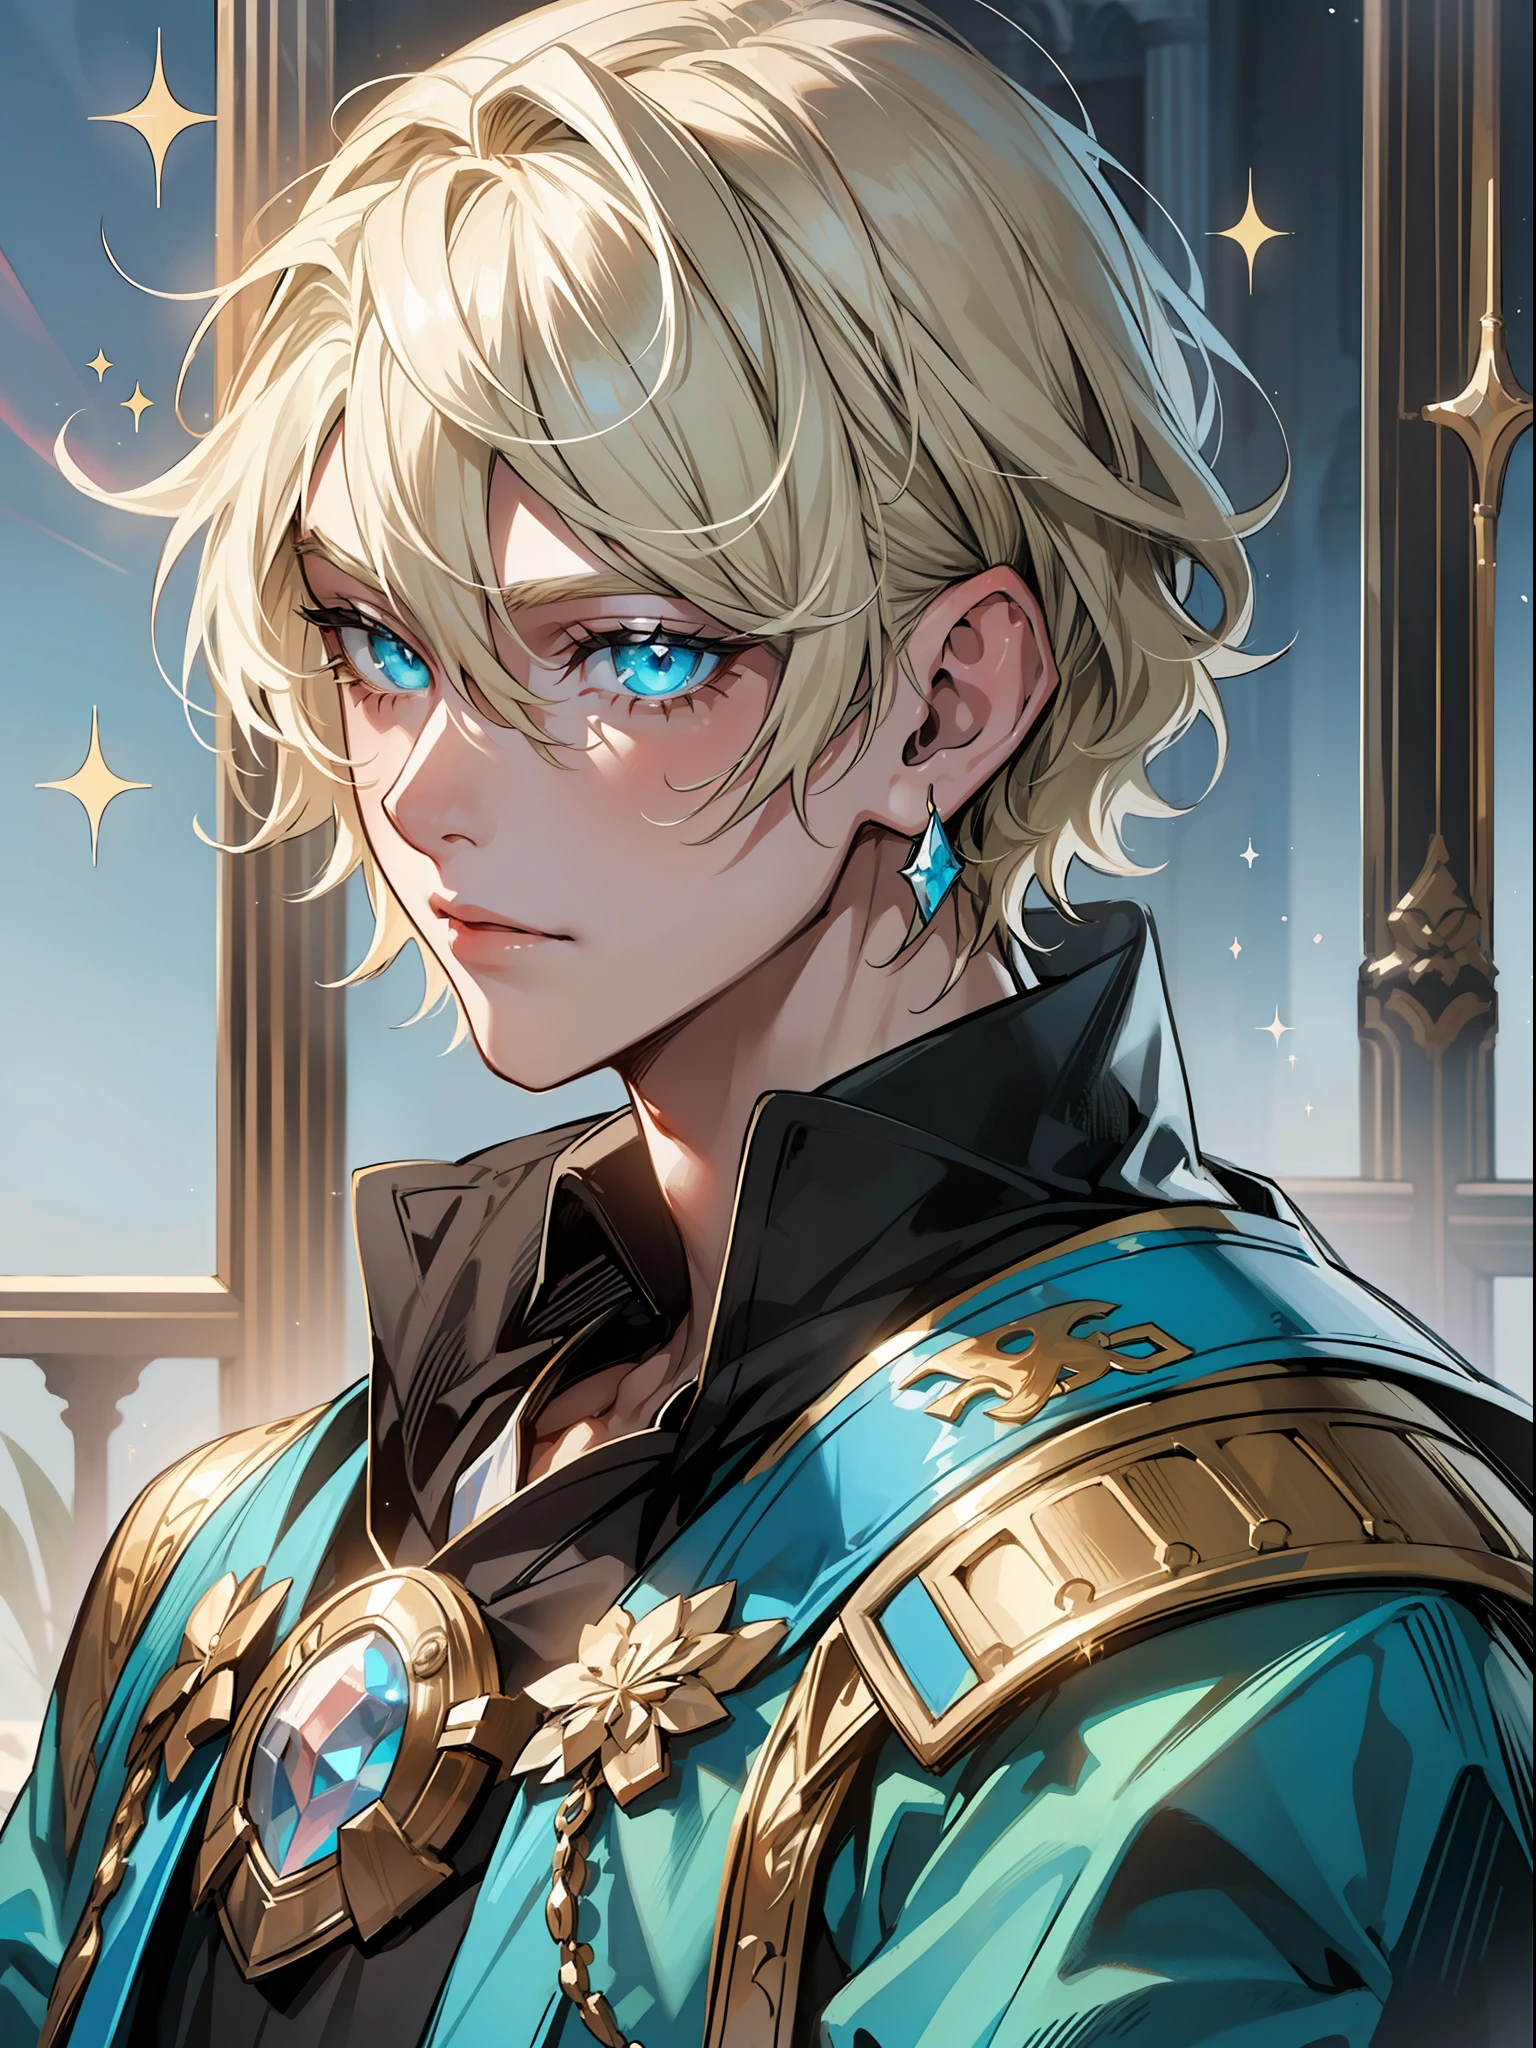 (tmasterpiece), portraite of a, 1boy, amazing quality, Detailed knight-prince, Age 16 years, (Sparkly light, Almost platinum blonde hair), Cyan eyes, faint smile, upper-body, Princely attire